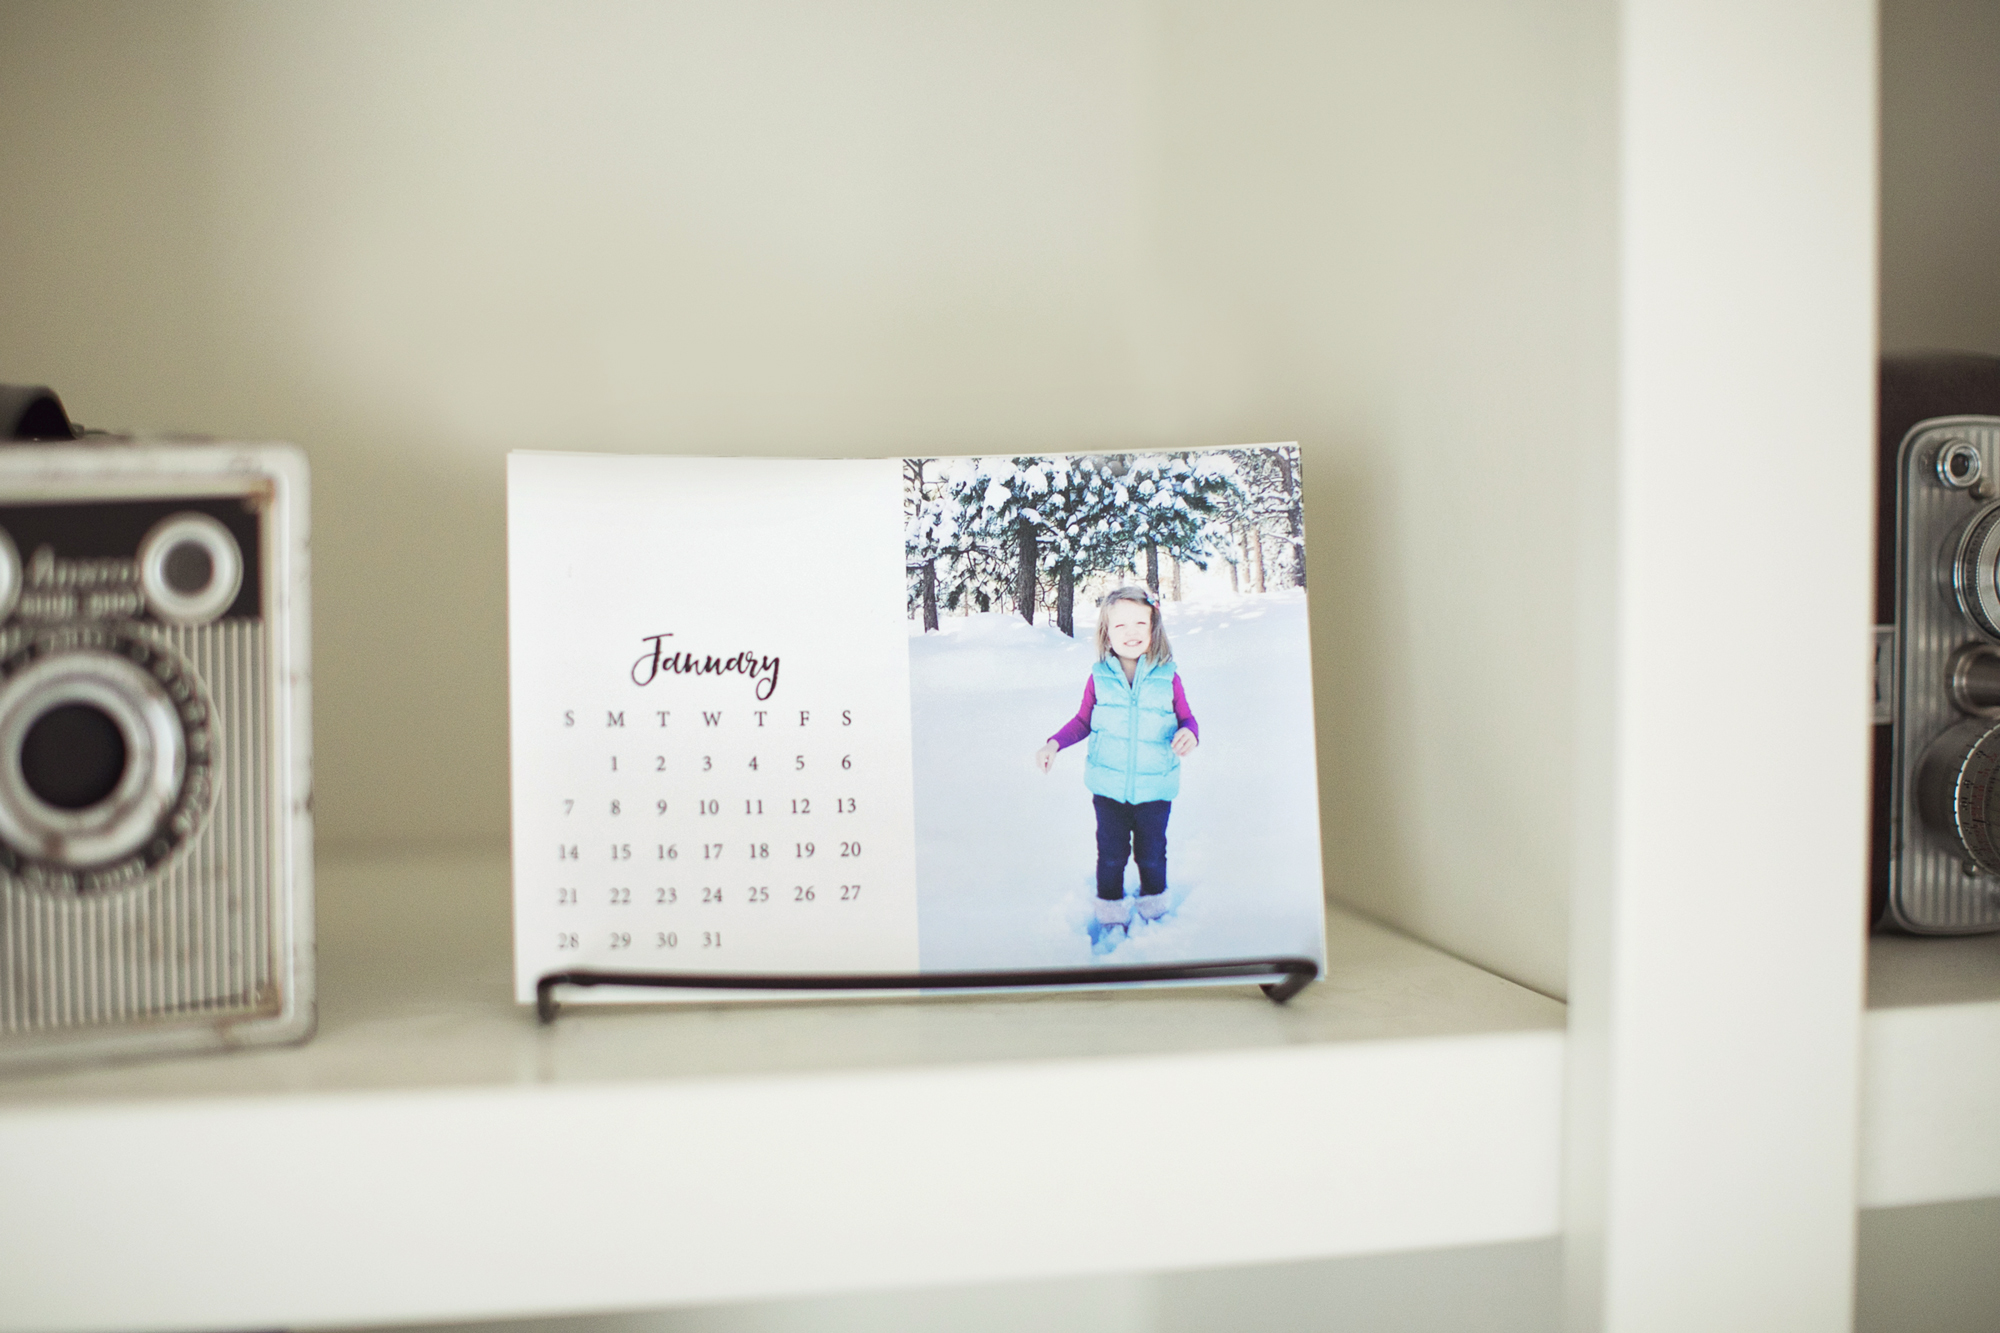 Check out this free download to make your own photo calendar in the Project Life App.  It's a super easy and inexpensive way to make a personalized gift!